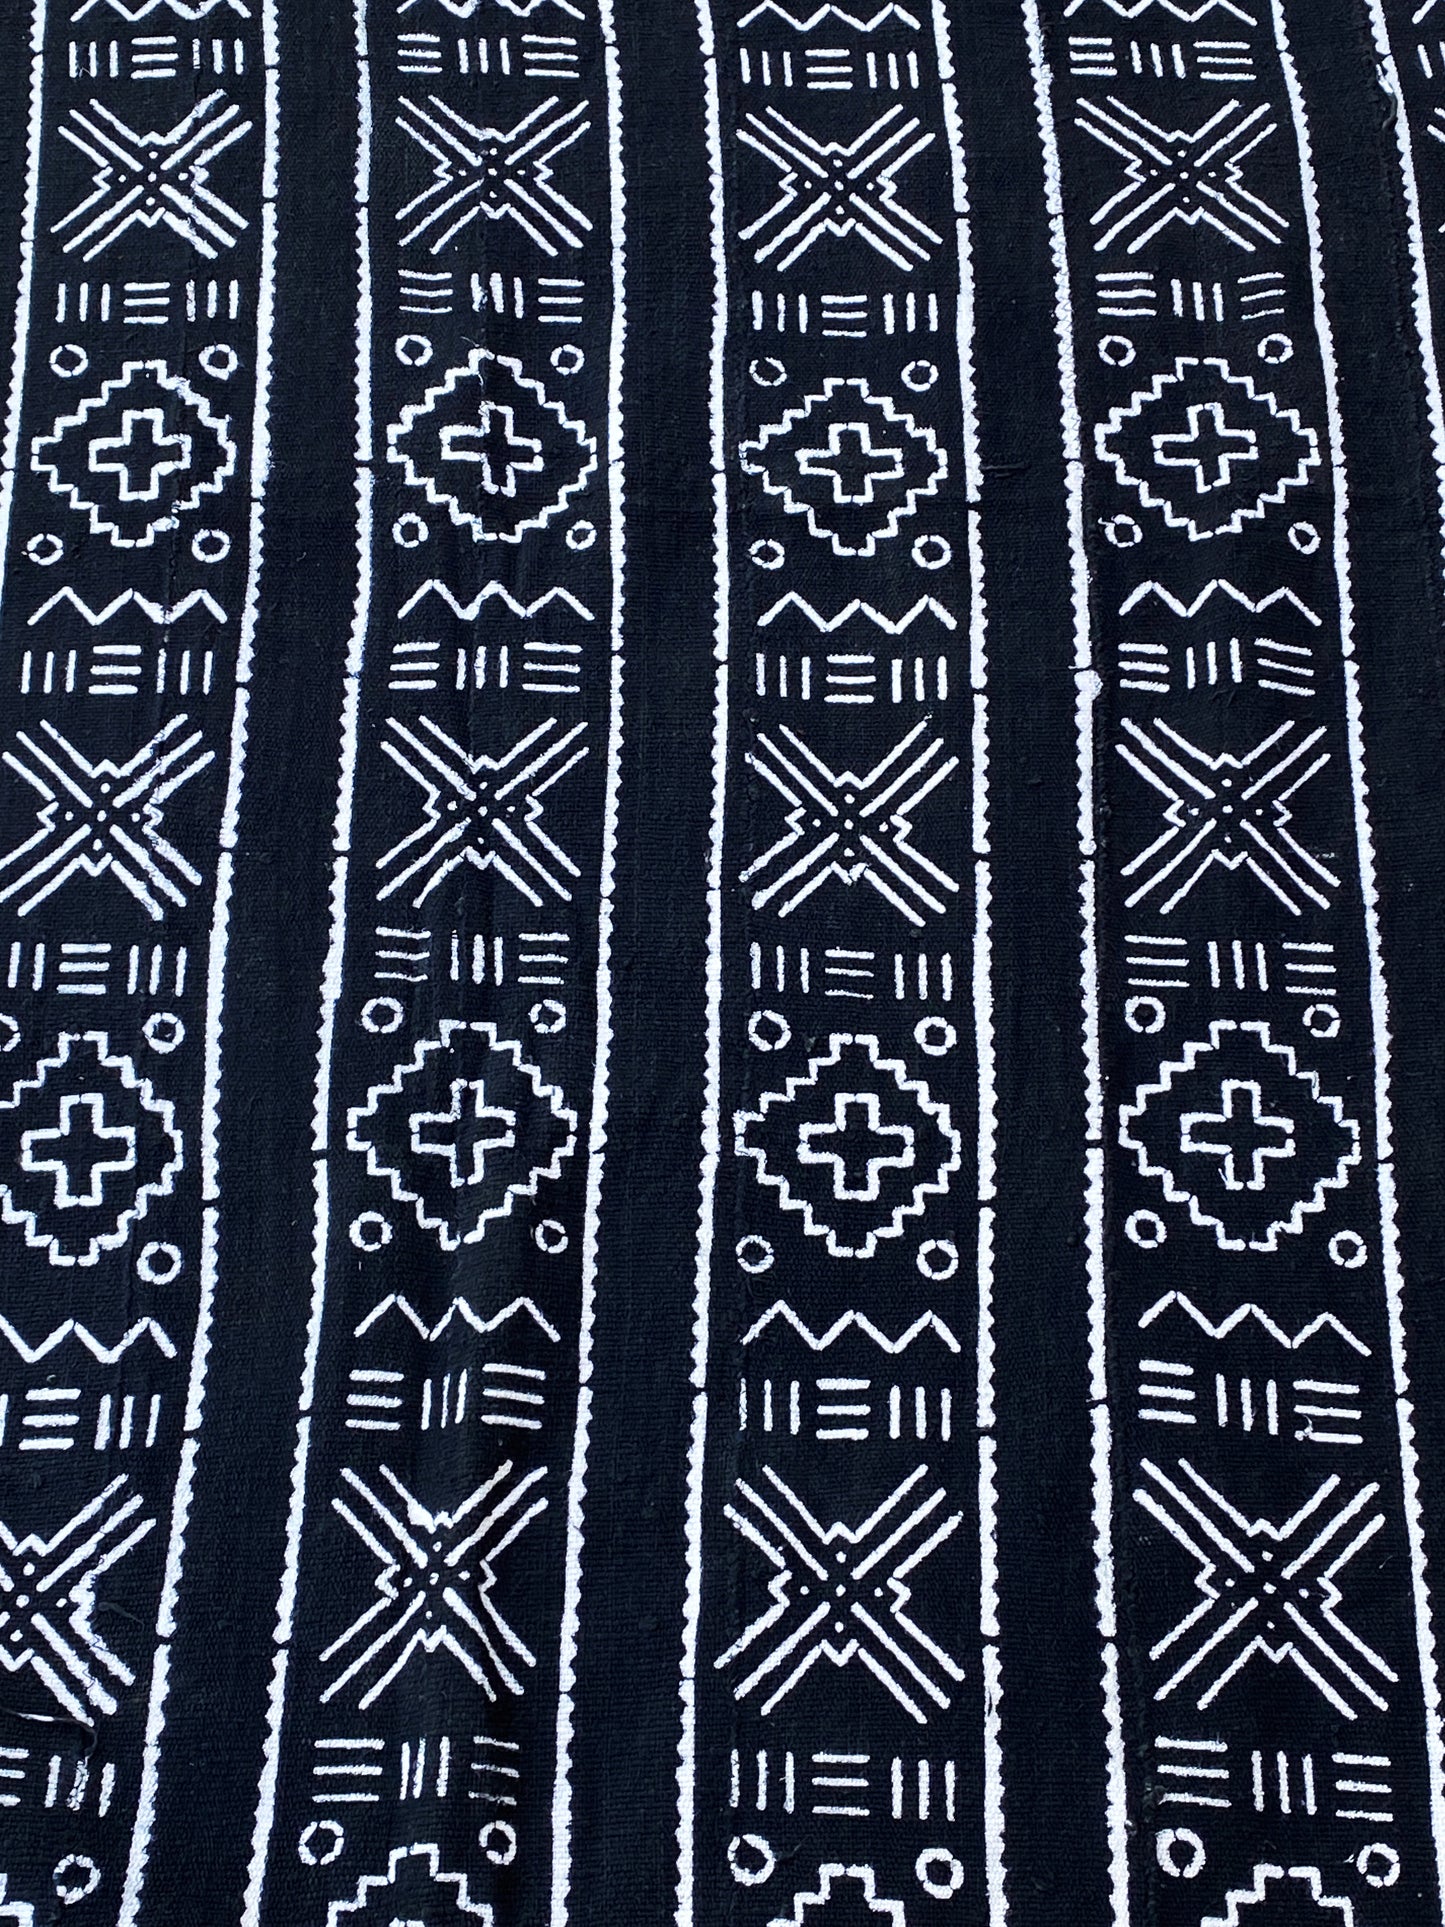 # 3854 African Black and White Mud Cloth Textile Mali 42" by 68"